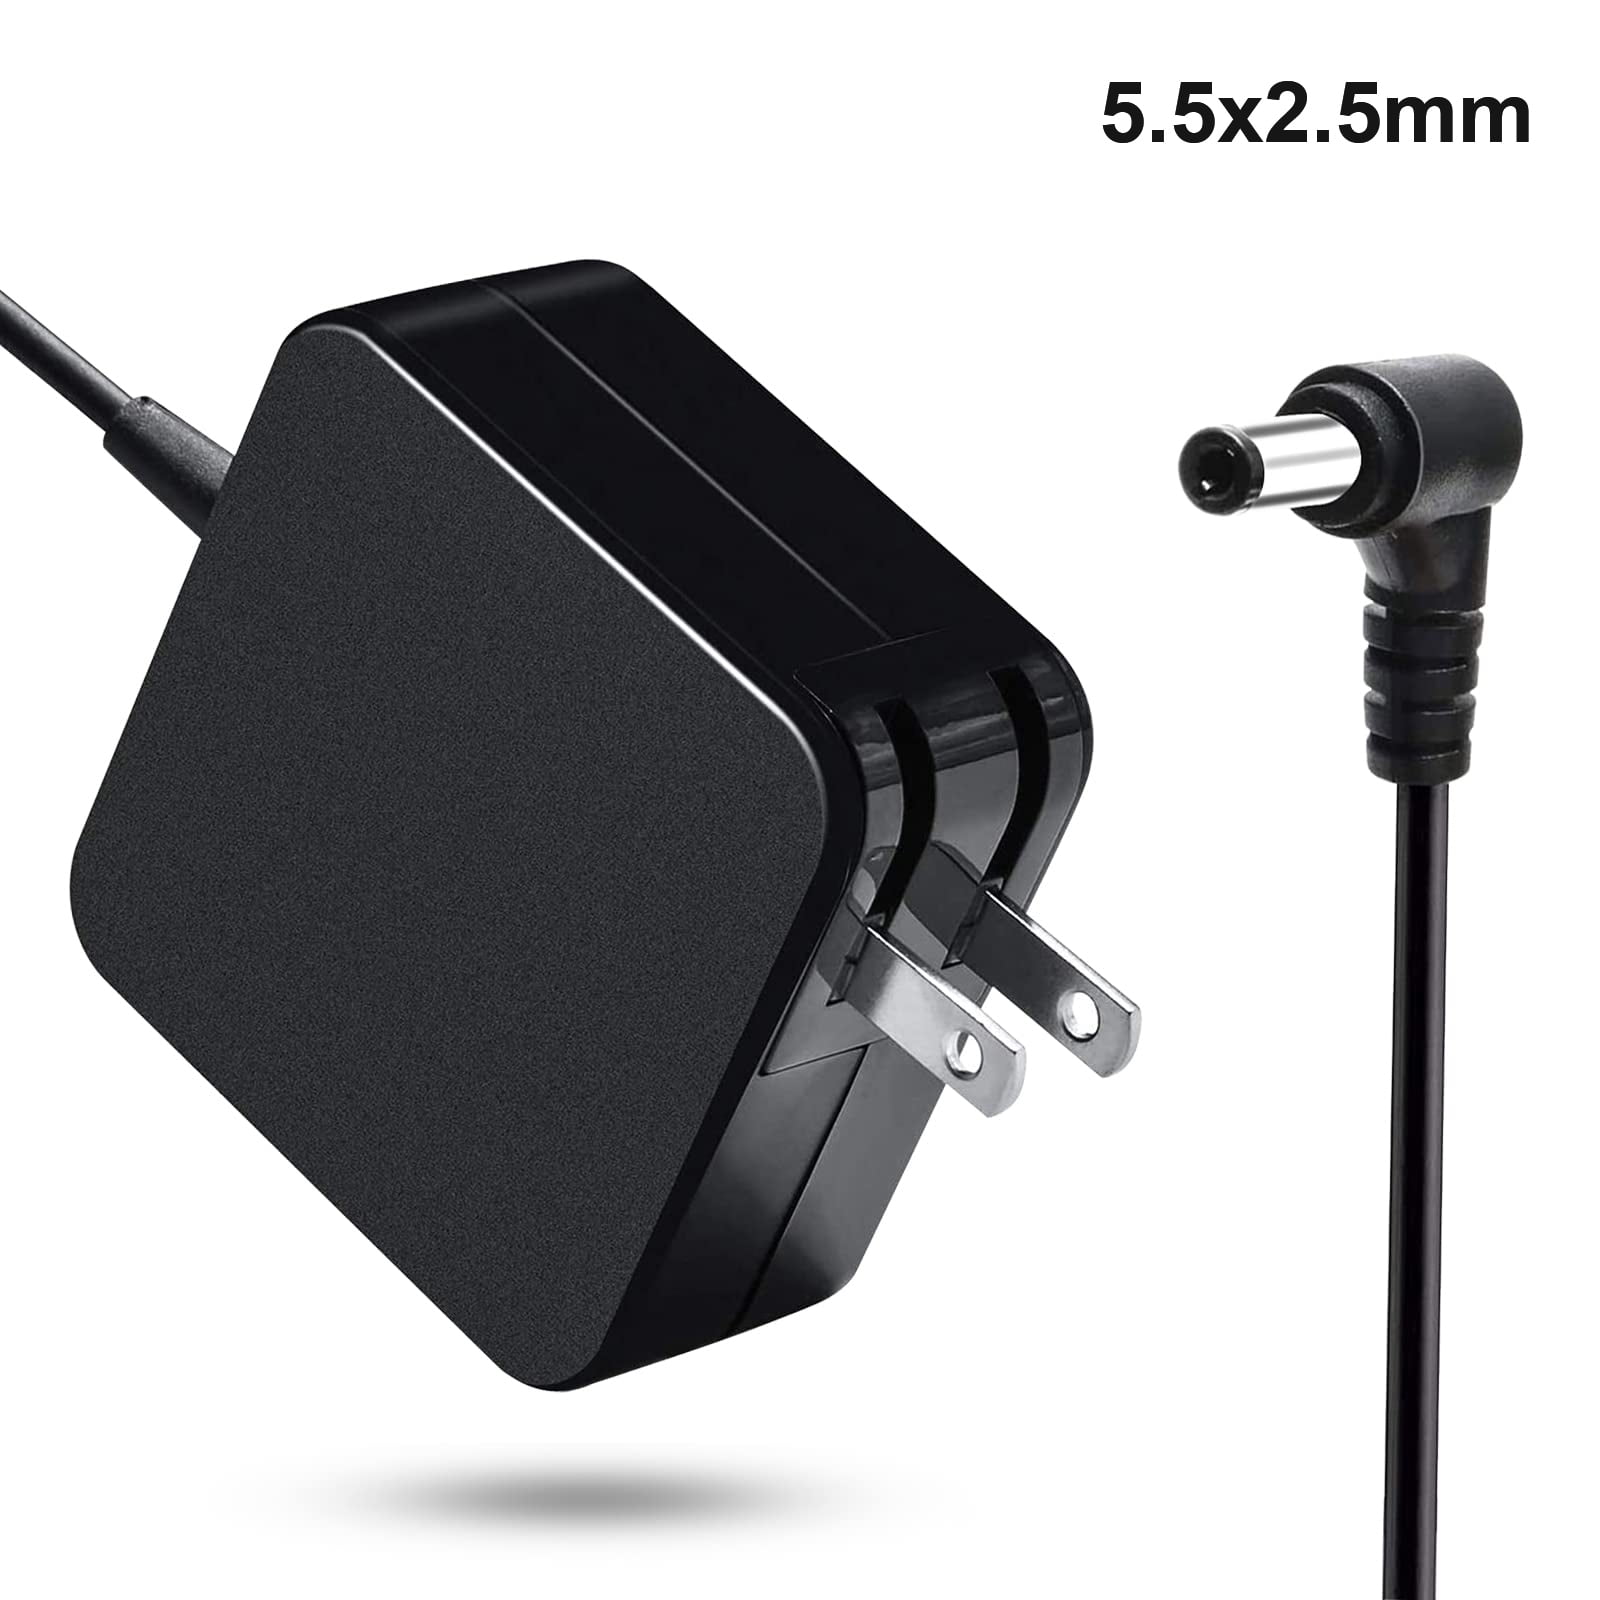 45W Power Adapter Charger for ASUS F553MA F553M F553S F553SA AC1900  DSL-AC68U